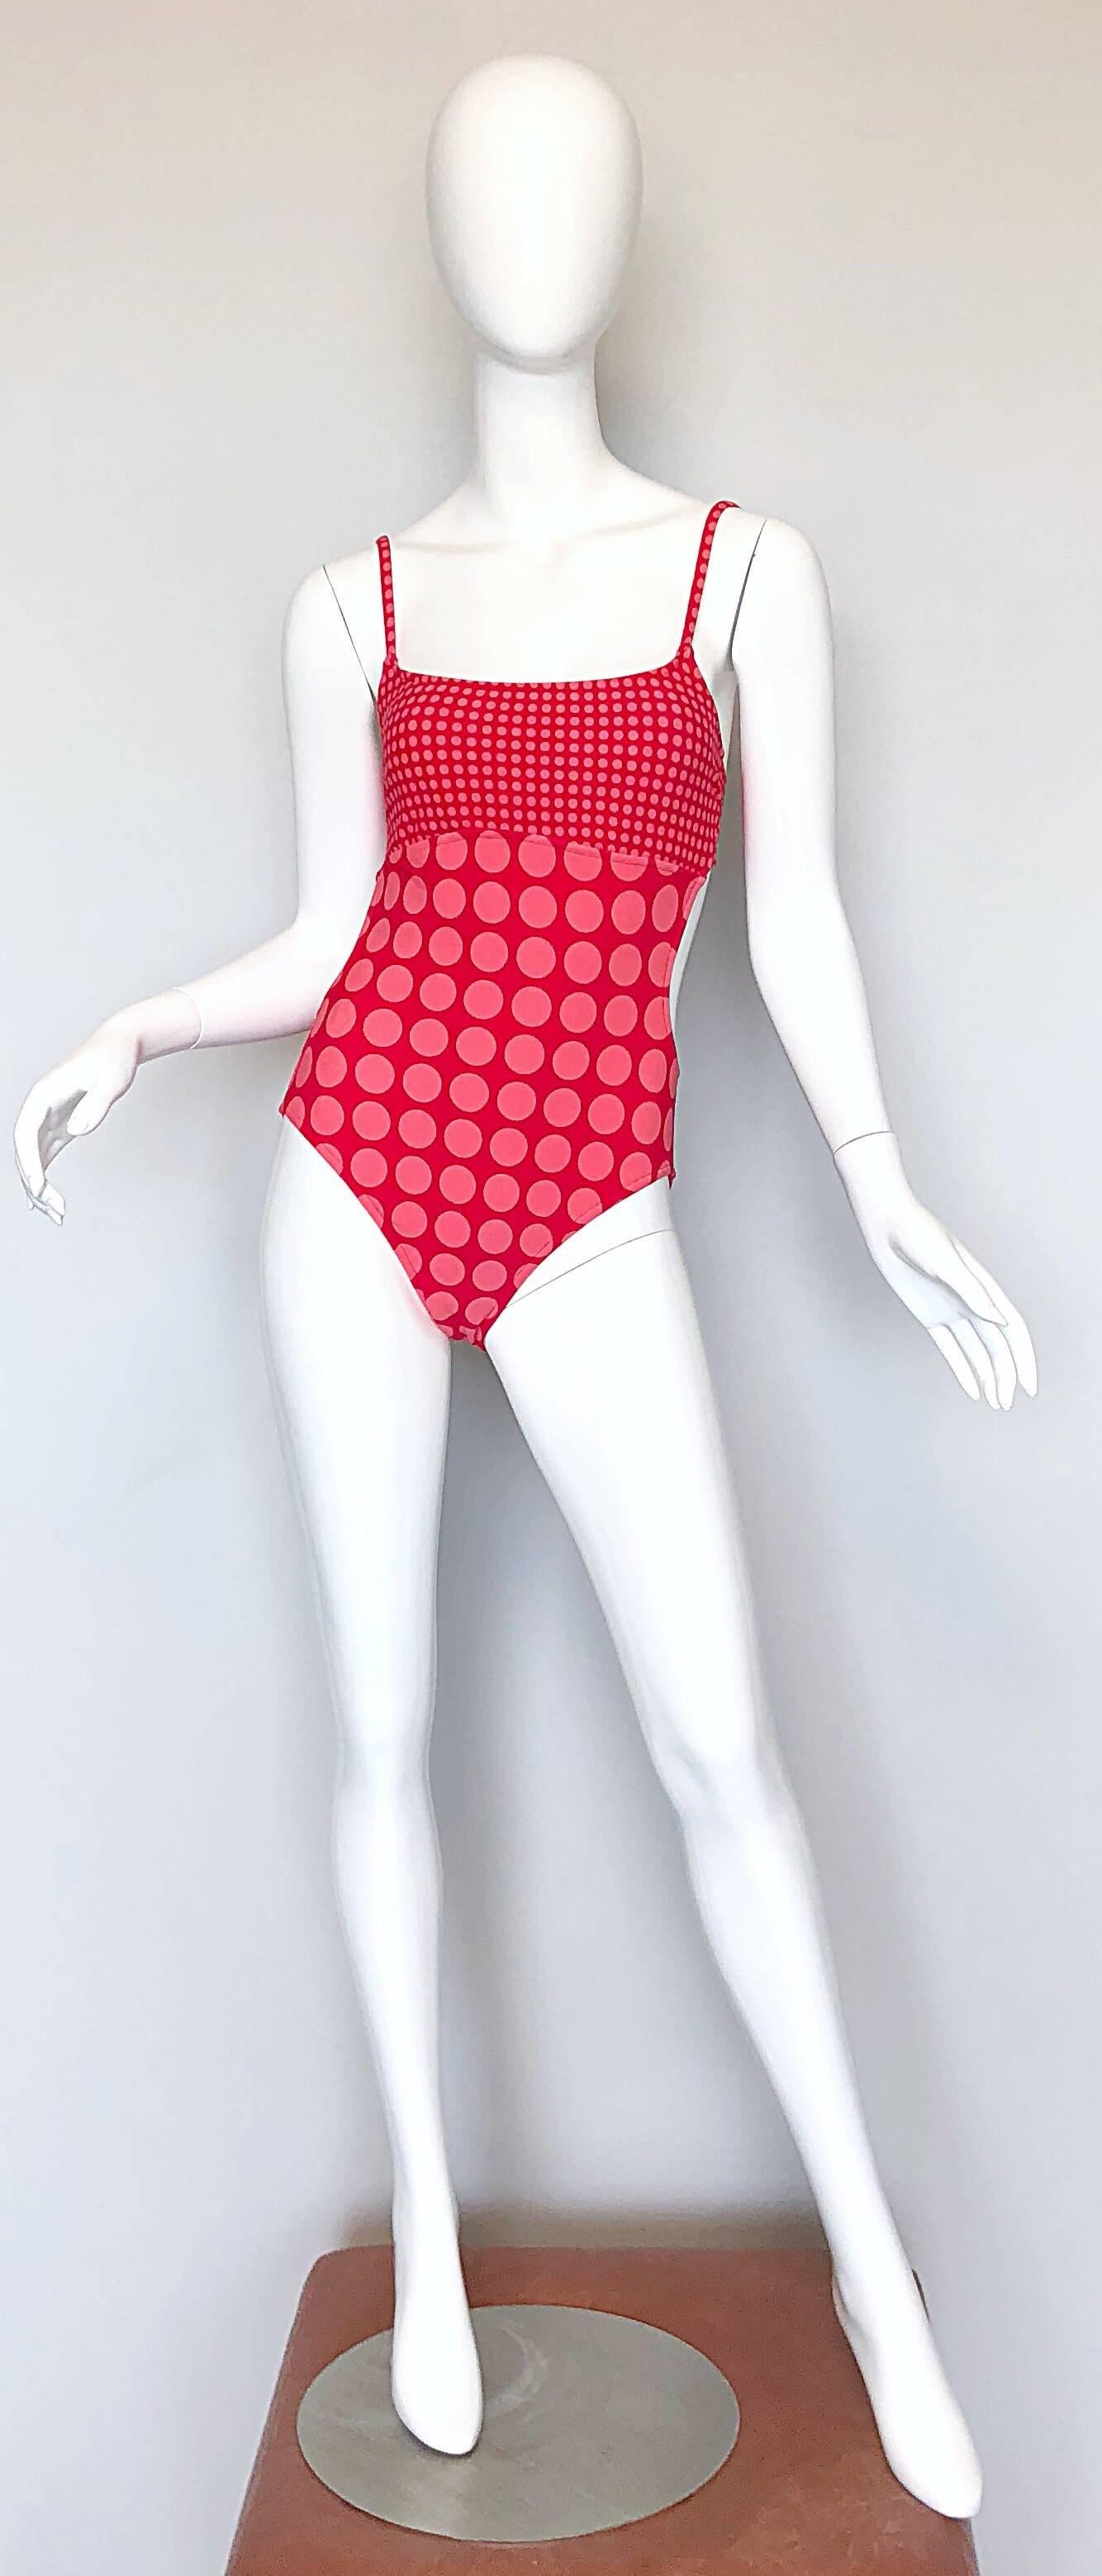 Bill Blass Vintage Cut Out 1990s Pink Red Polka Dot One Piece Bodysuit Swimsuit  For Sale 2